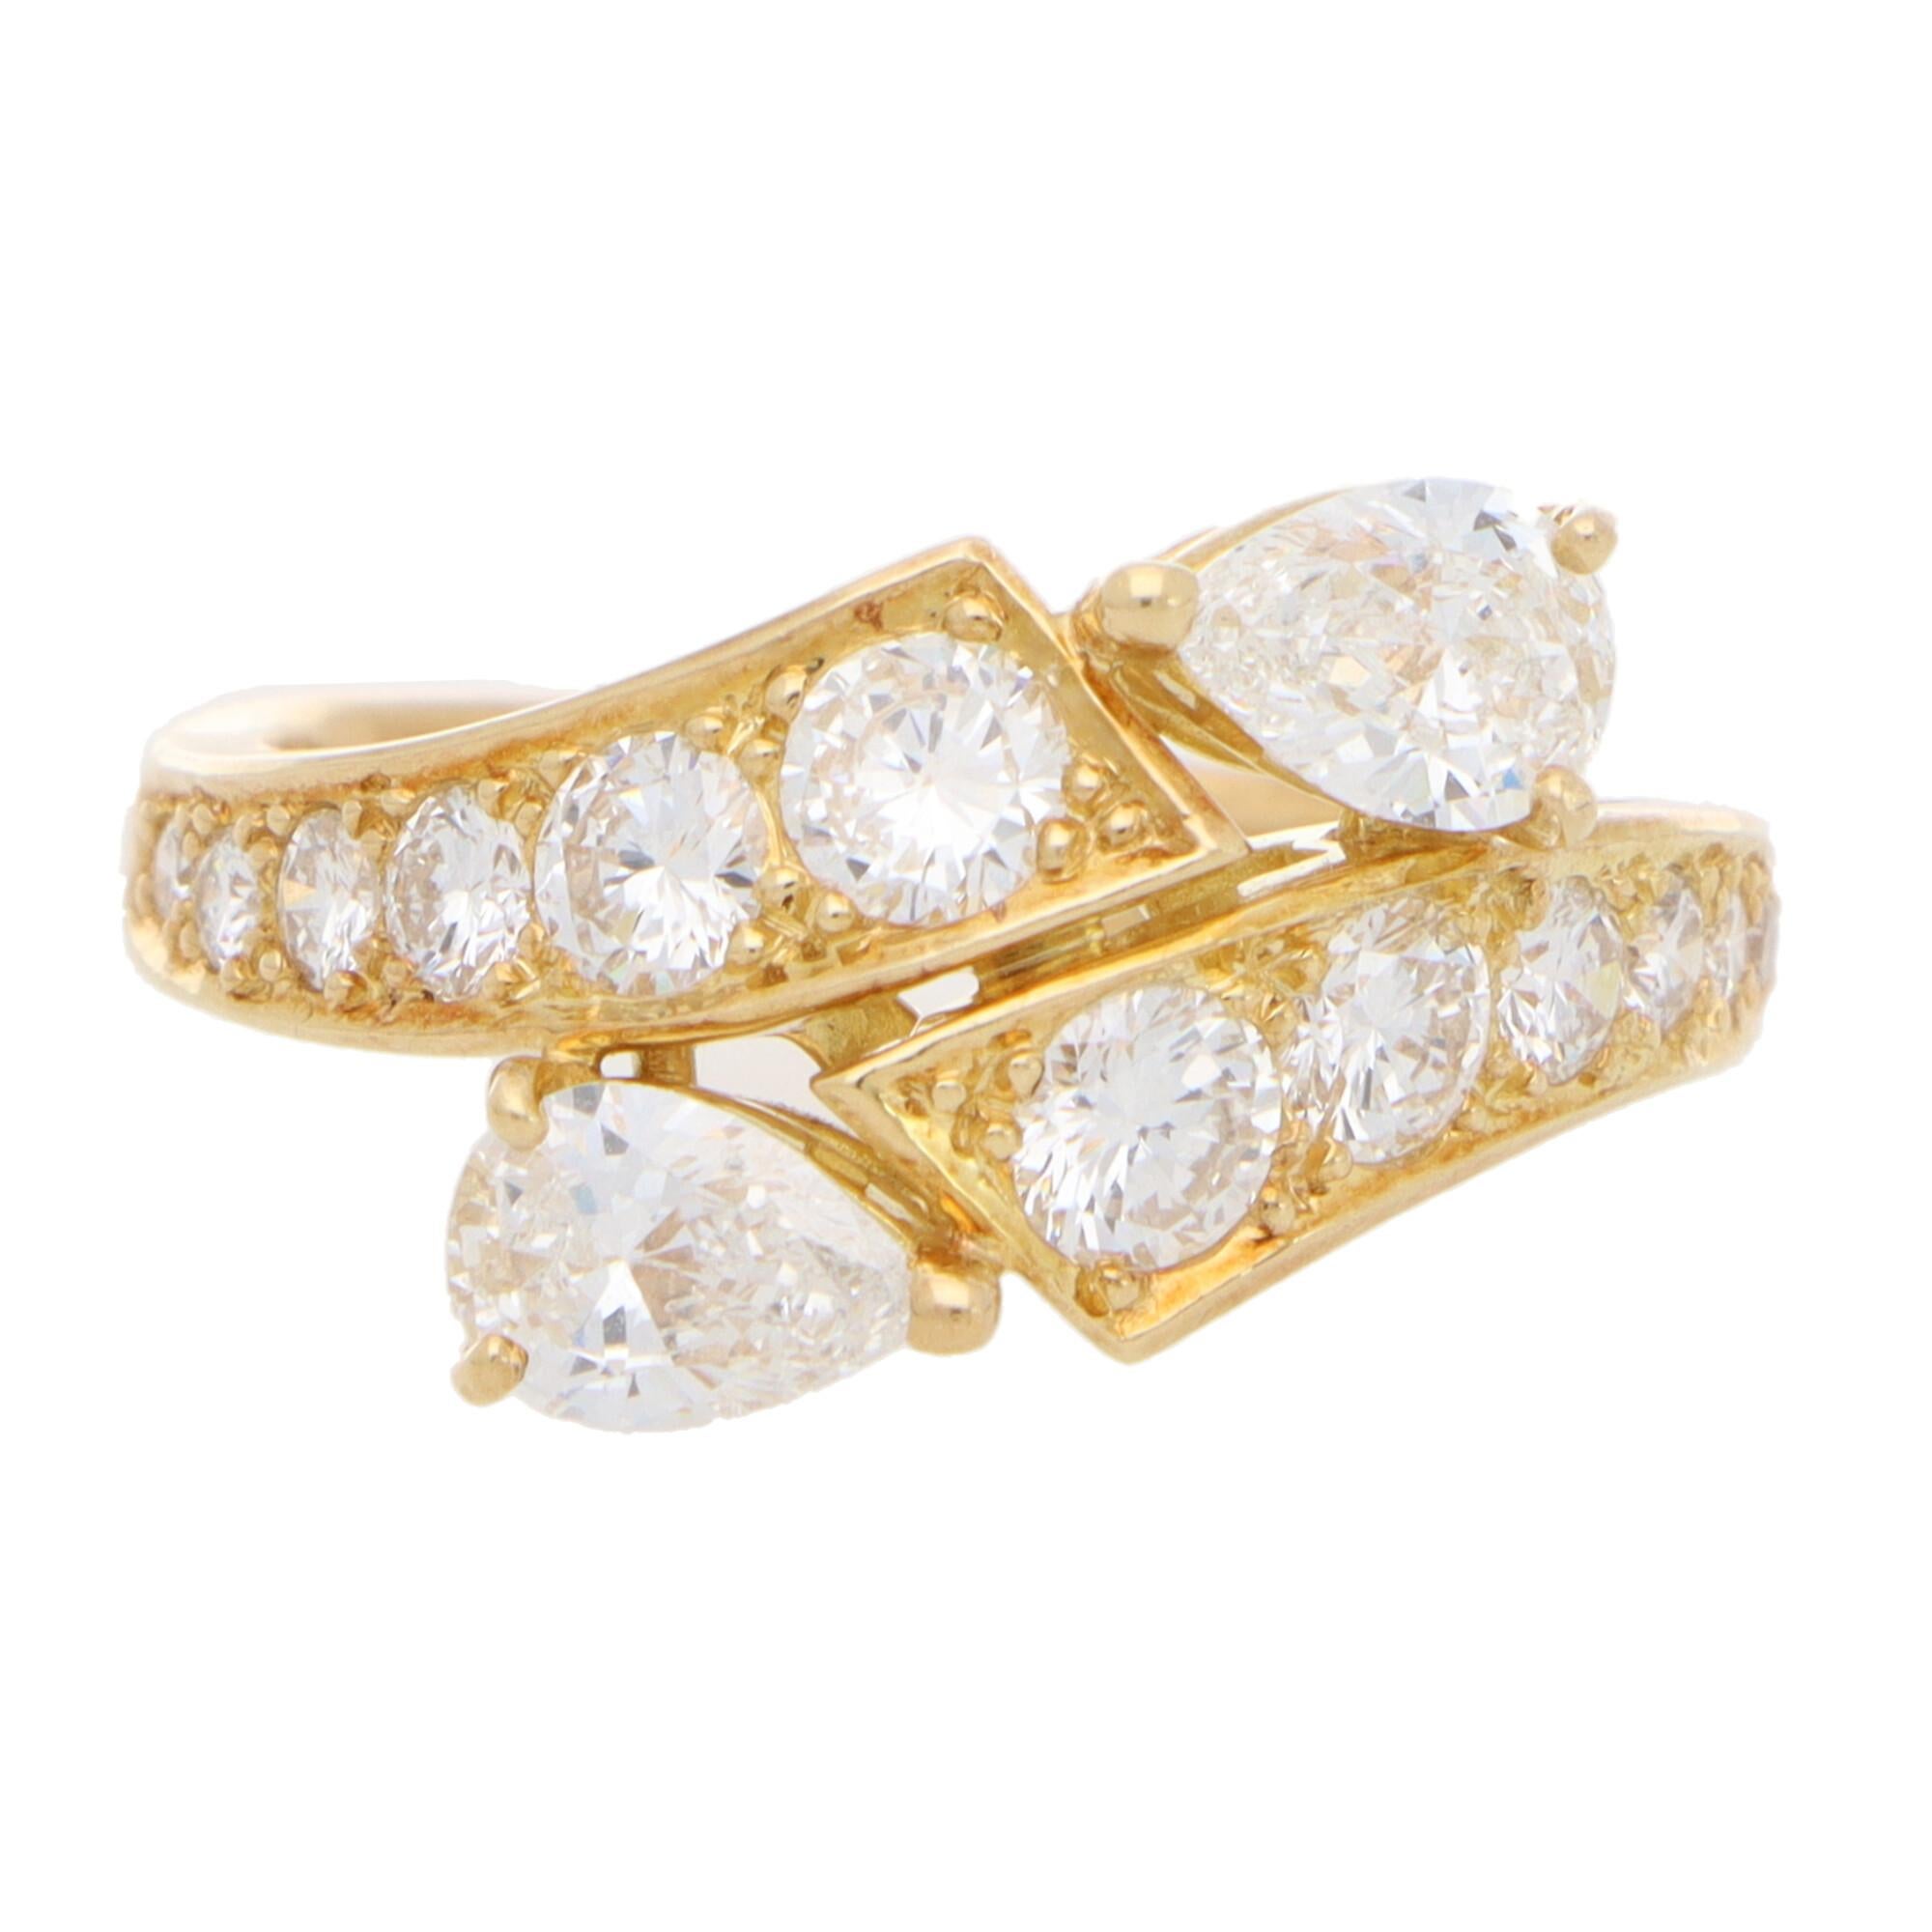 Pear Cut Vintage Piaget Toi-et-moi Diamond Crossover Ring Set in 18k Yellow Gold